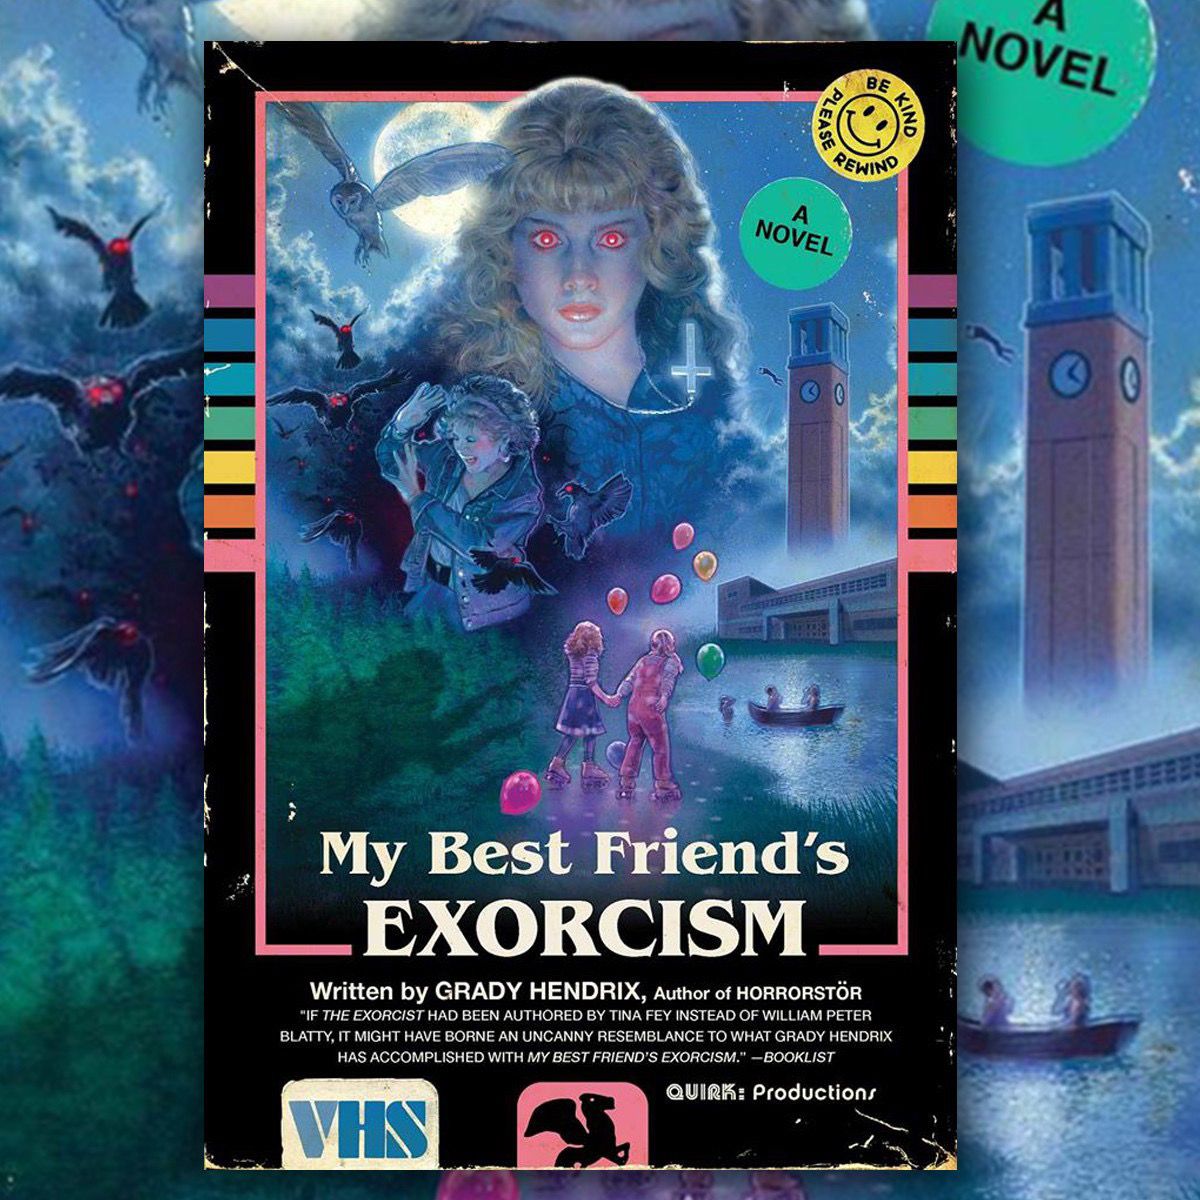 The cover of My Best Friend’s Exorcism, a delightful pastiche illustration that includes evil owls, eerie balloons, and a misty lake.